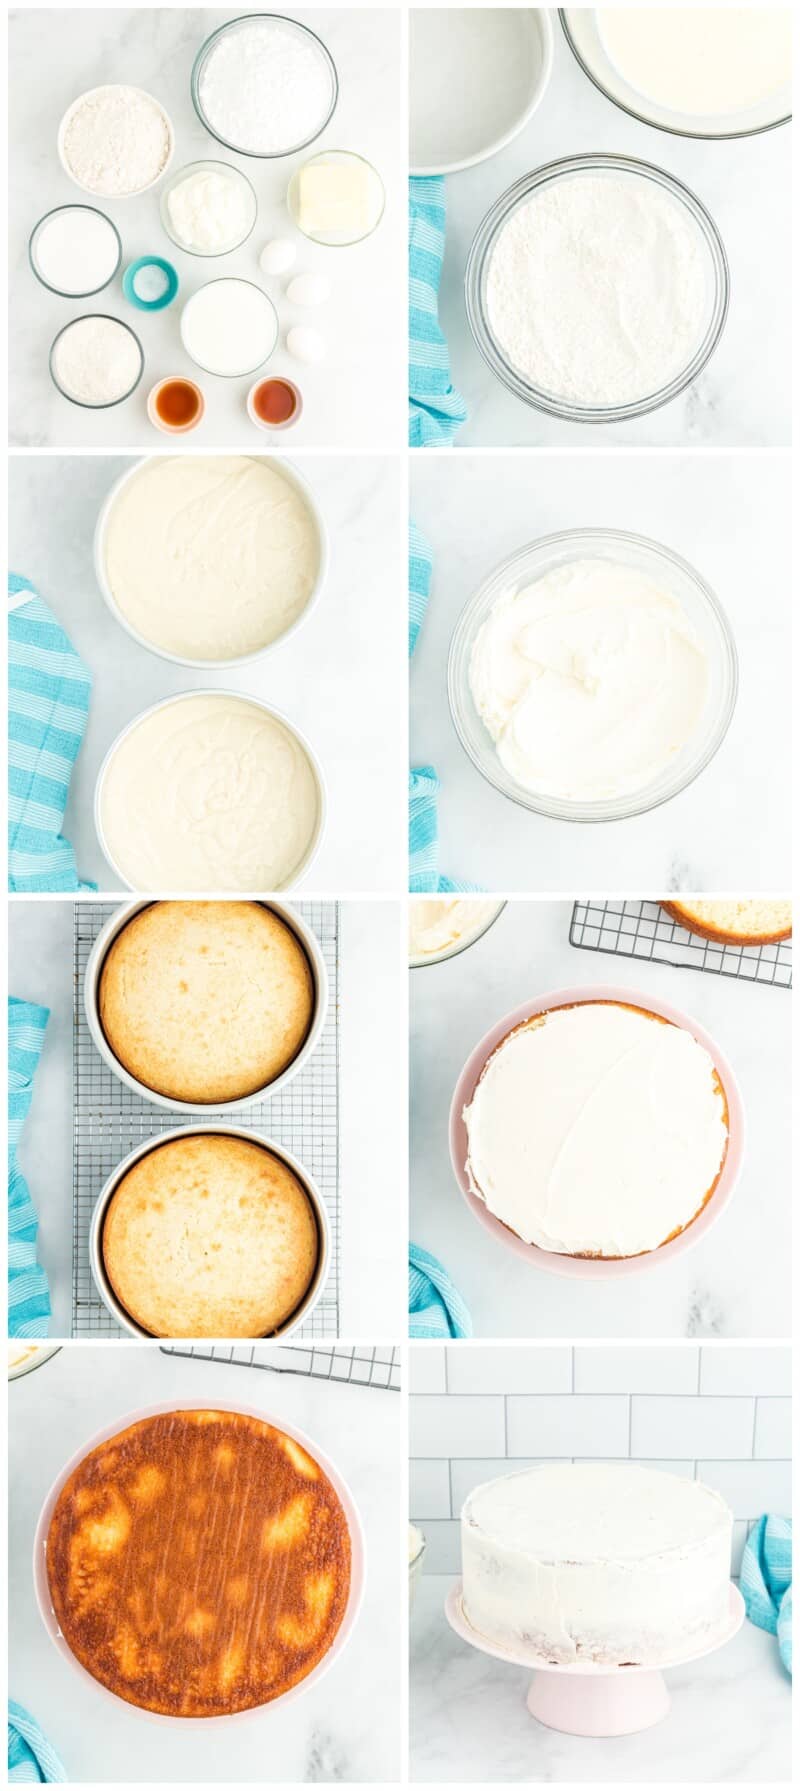 step by step photos for how to make doctored white cake mix.